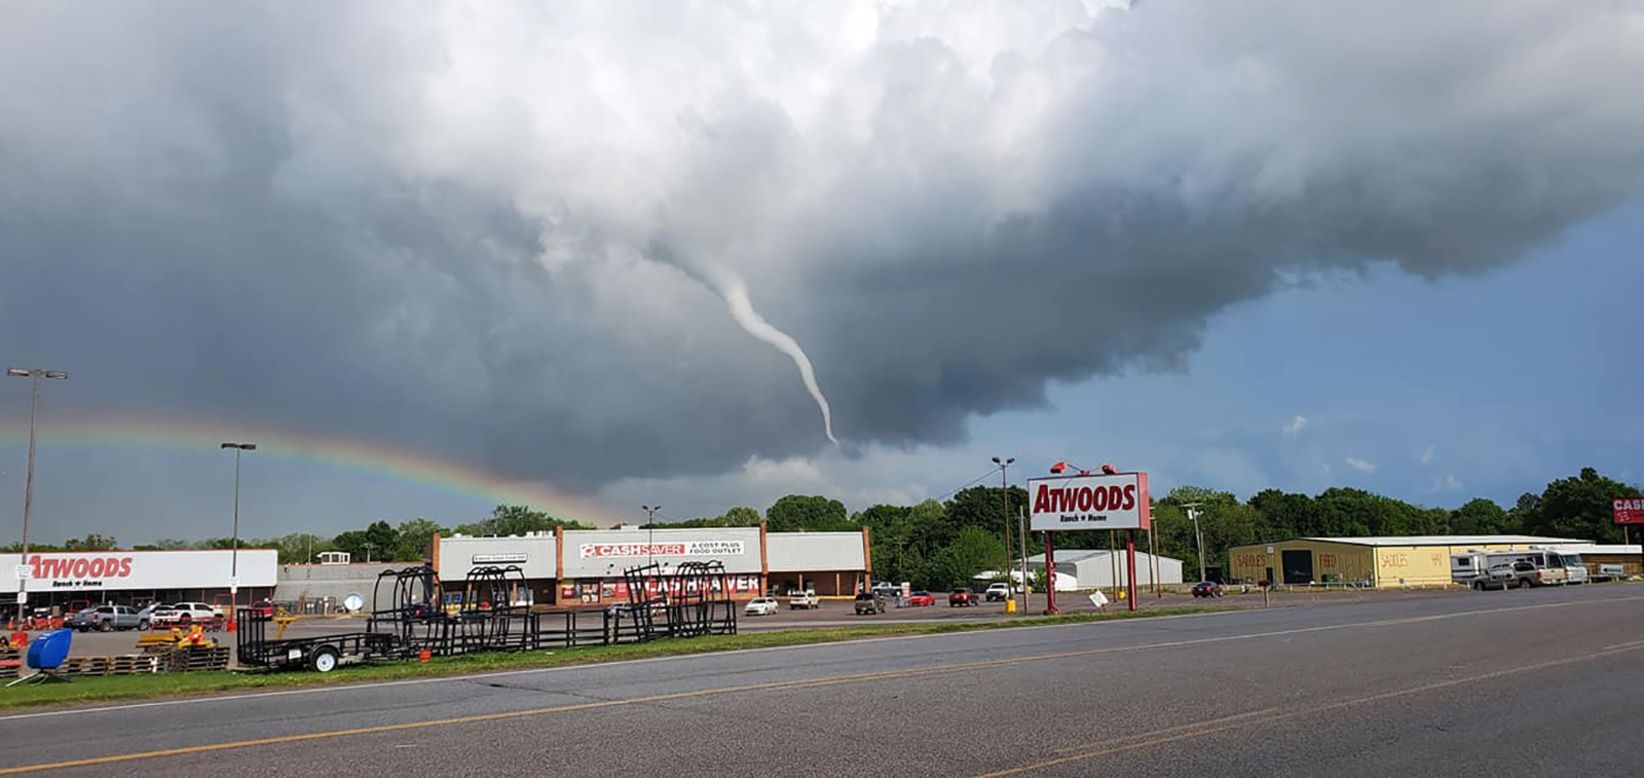 A tornado is seen in Madill, Oklahoma, on Wednesday, April 22. <a href="https://www.cnn.com/2020/04/22/us/oklahoma-storms-tornadoes/index.html" target="_blank">Severe storms</a> ripped through parts of Oklahoma, Texas and Louisiana, officials said. At least six people were killed and more than a dozen were injured.